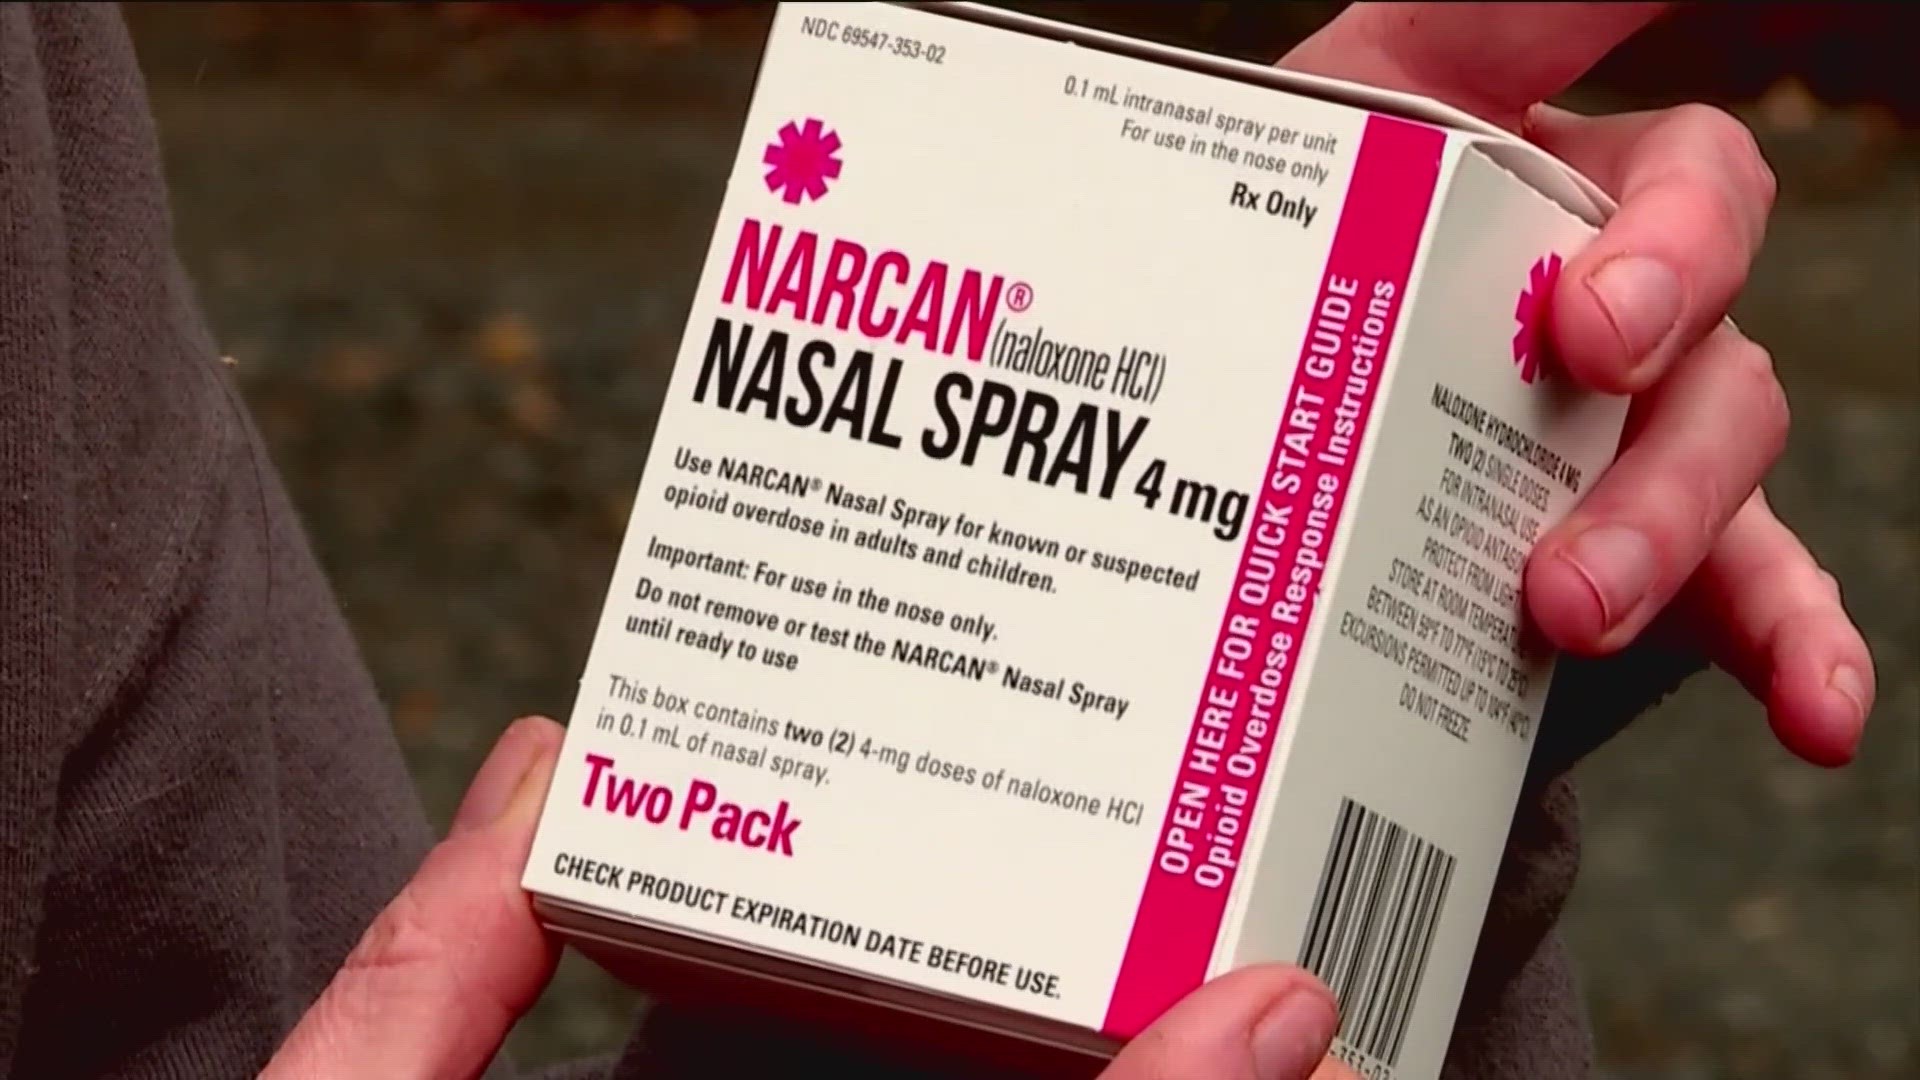 While naloxone is available in Idaho, stigmas around paperwork and data collection concern some Idahoans. The new project aims to fix that.